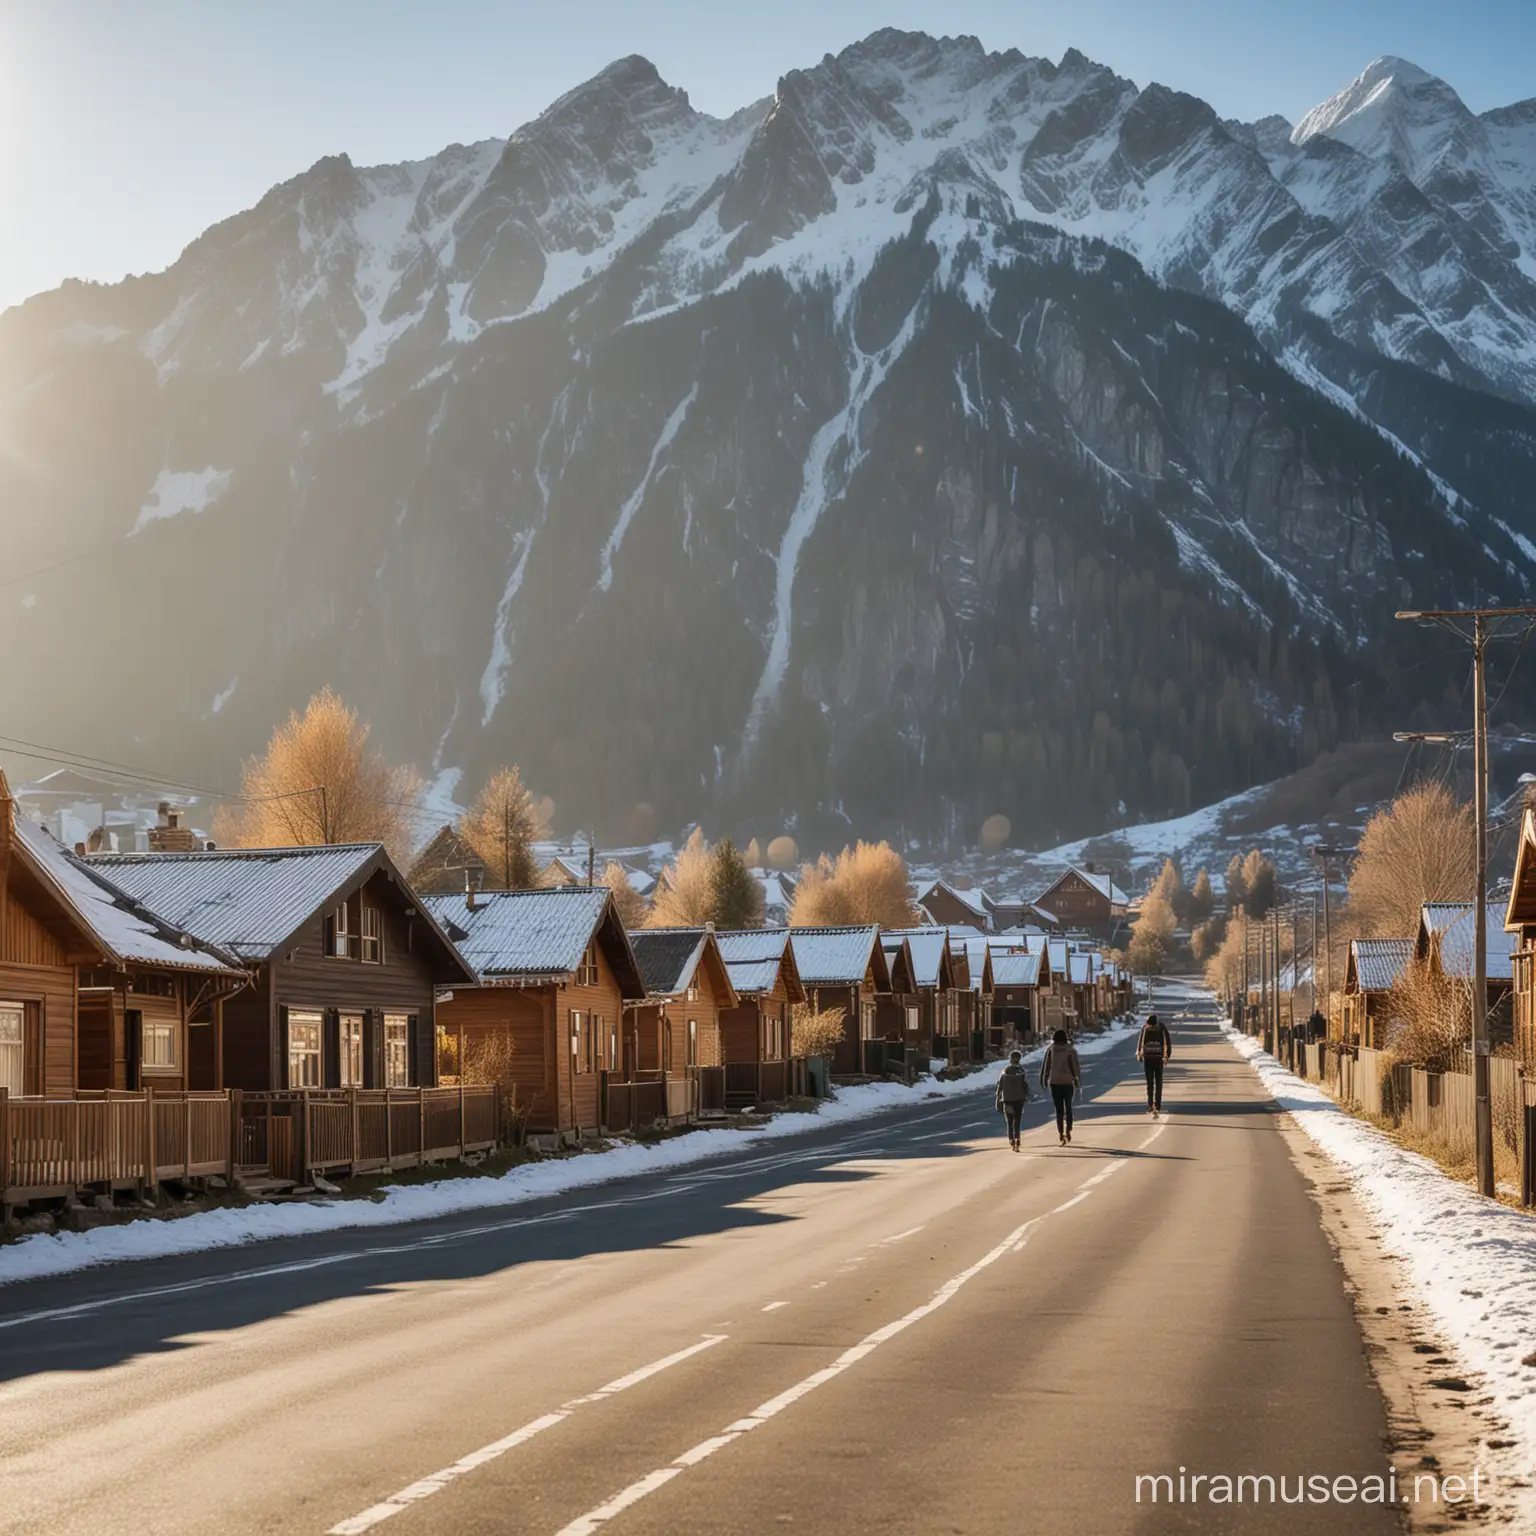 Scenic Winter Street with Wooden Houses and Mountain Backdrop